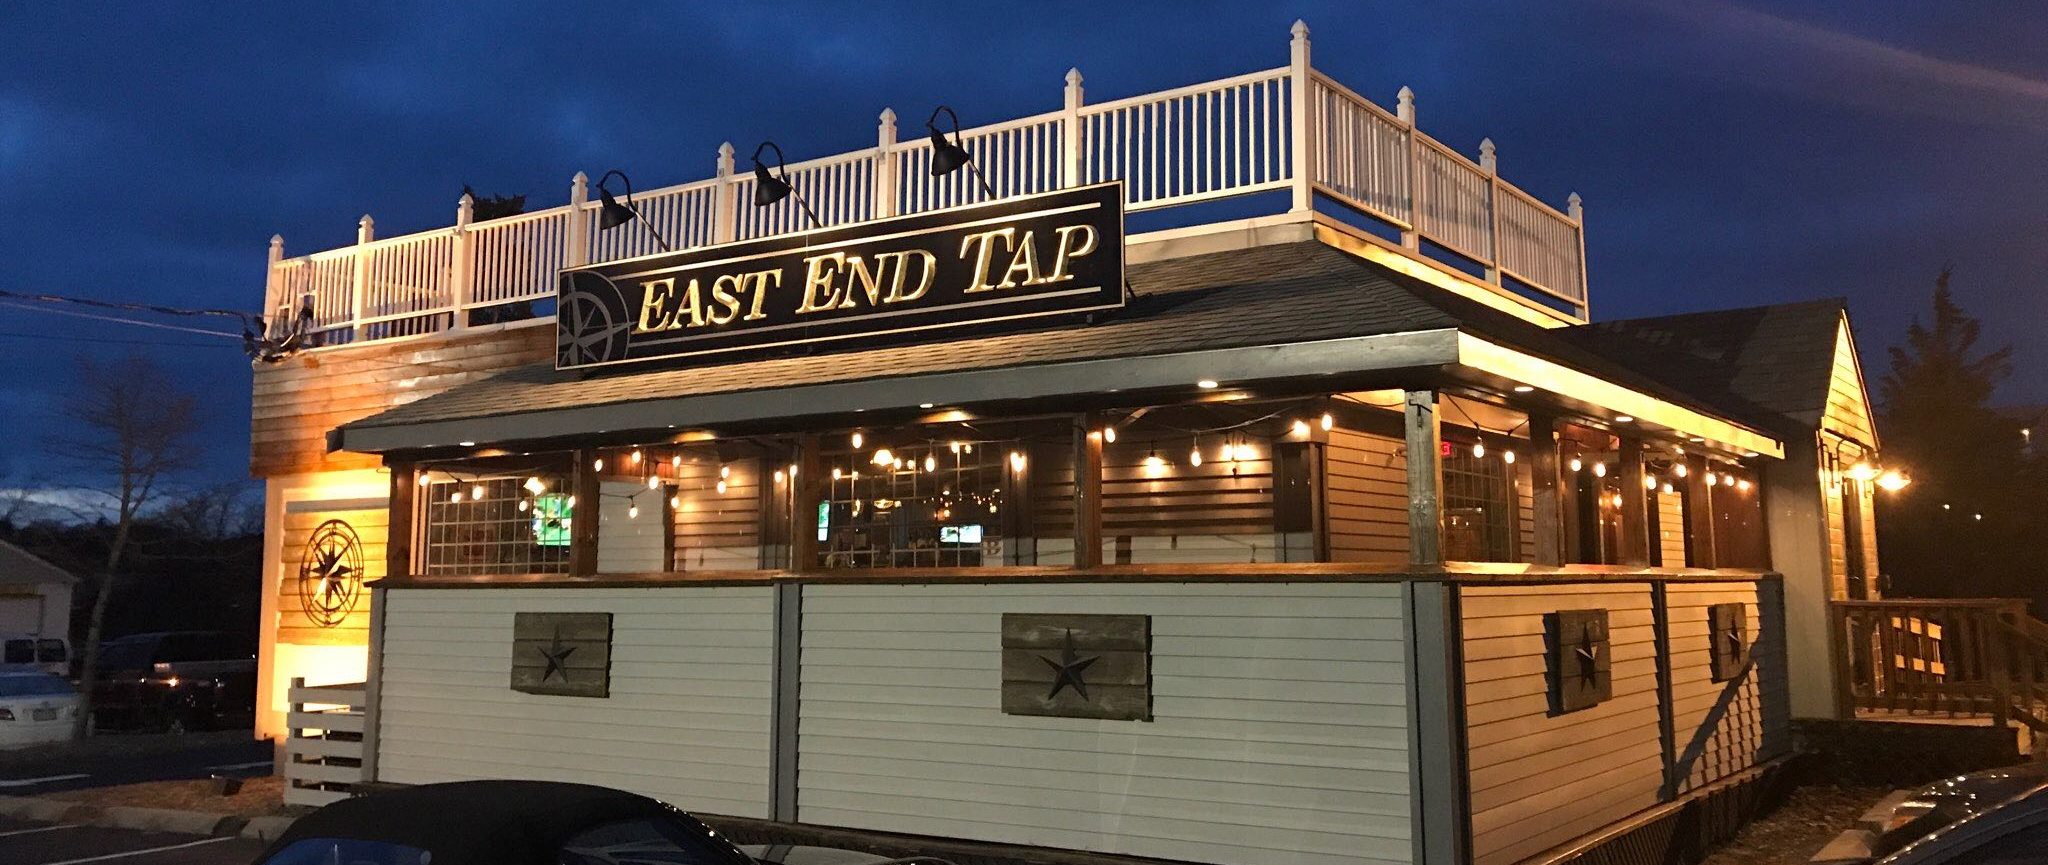 East End Tap – Family-friendly restaurant, offering great food and